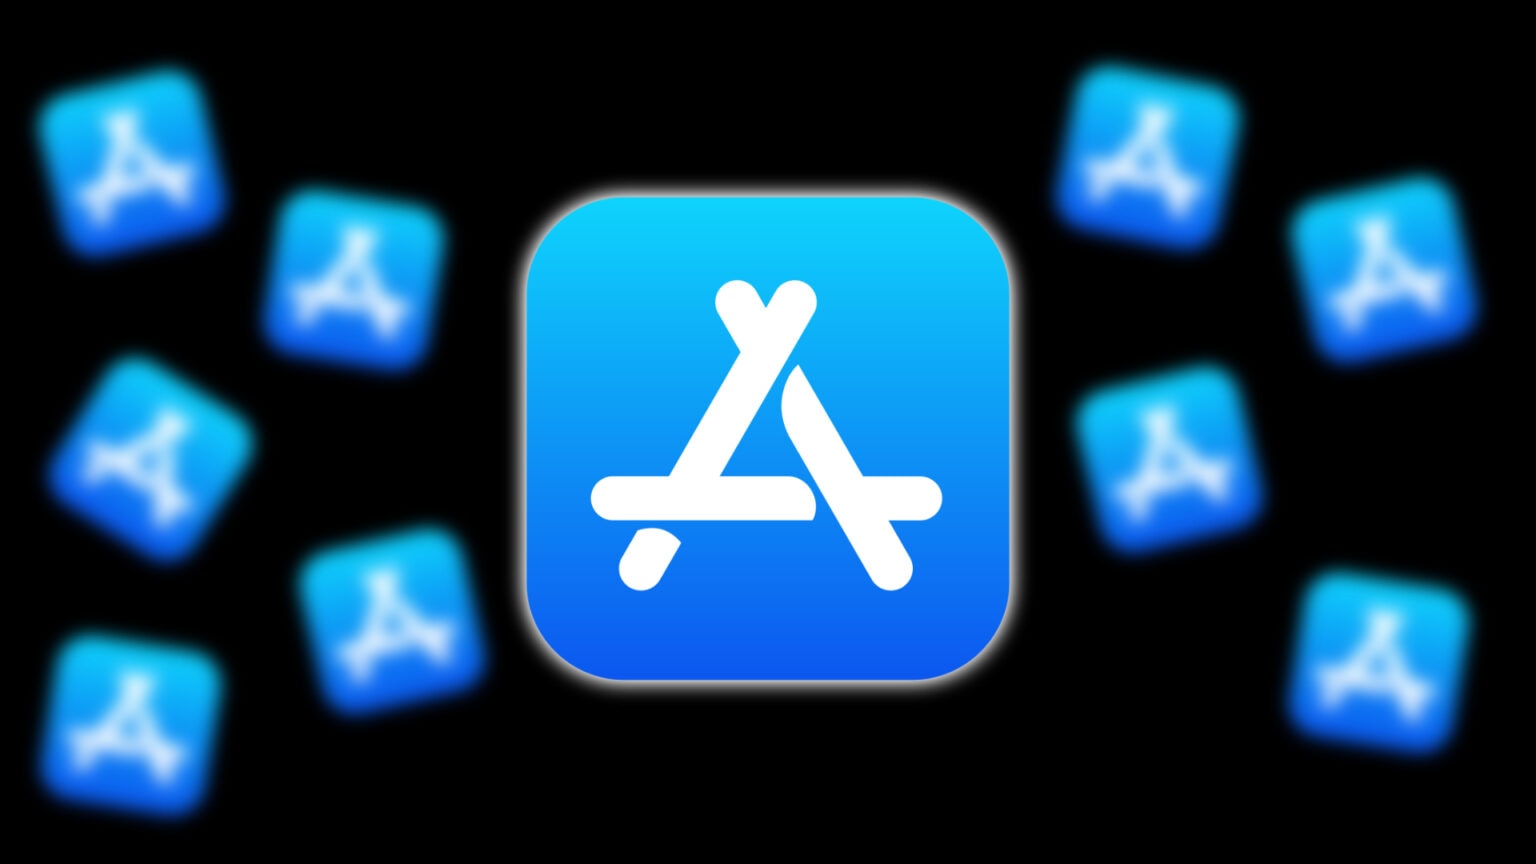 App Store must add third-party payments